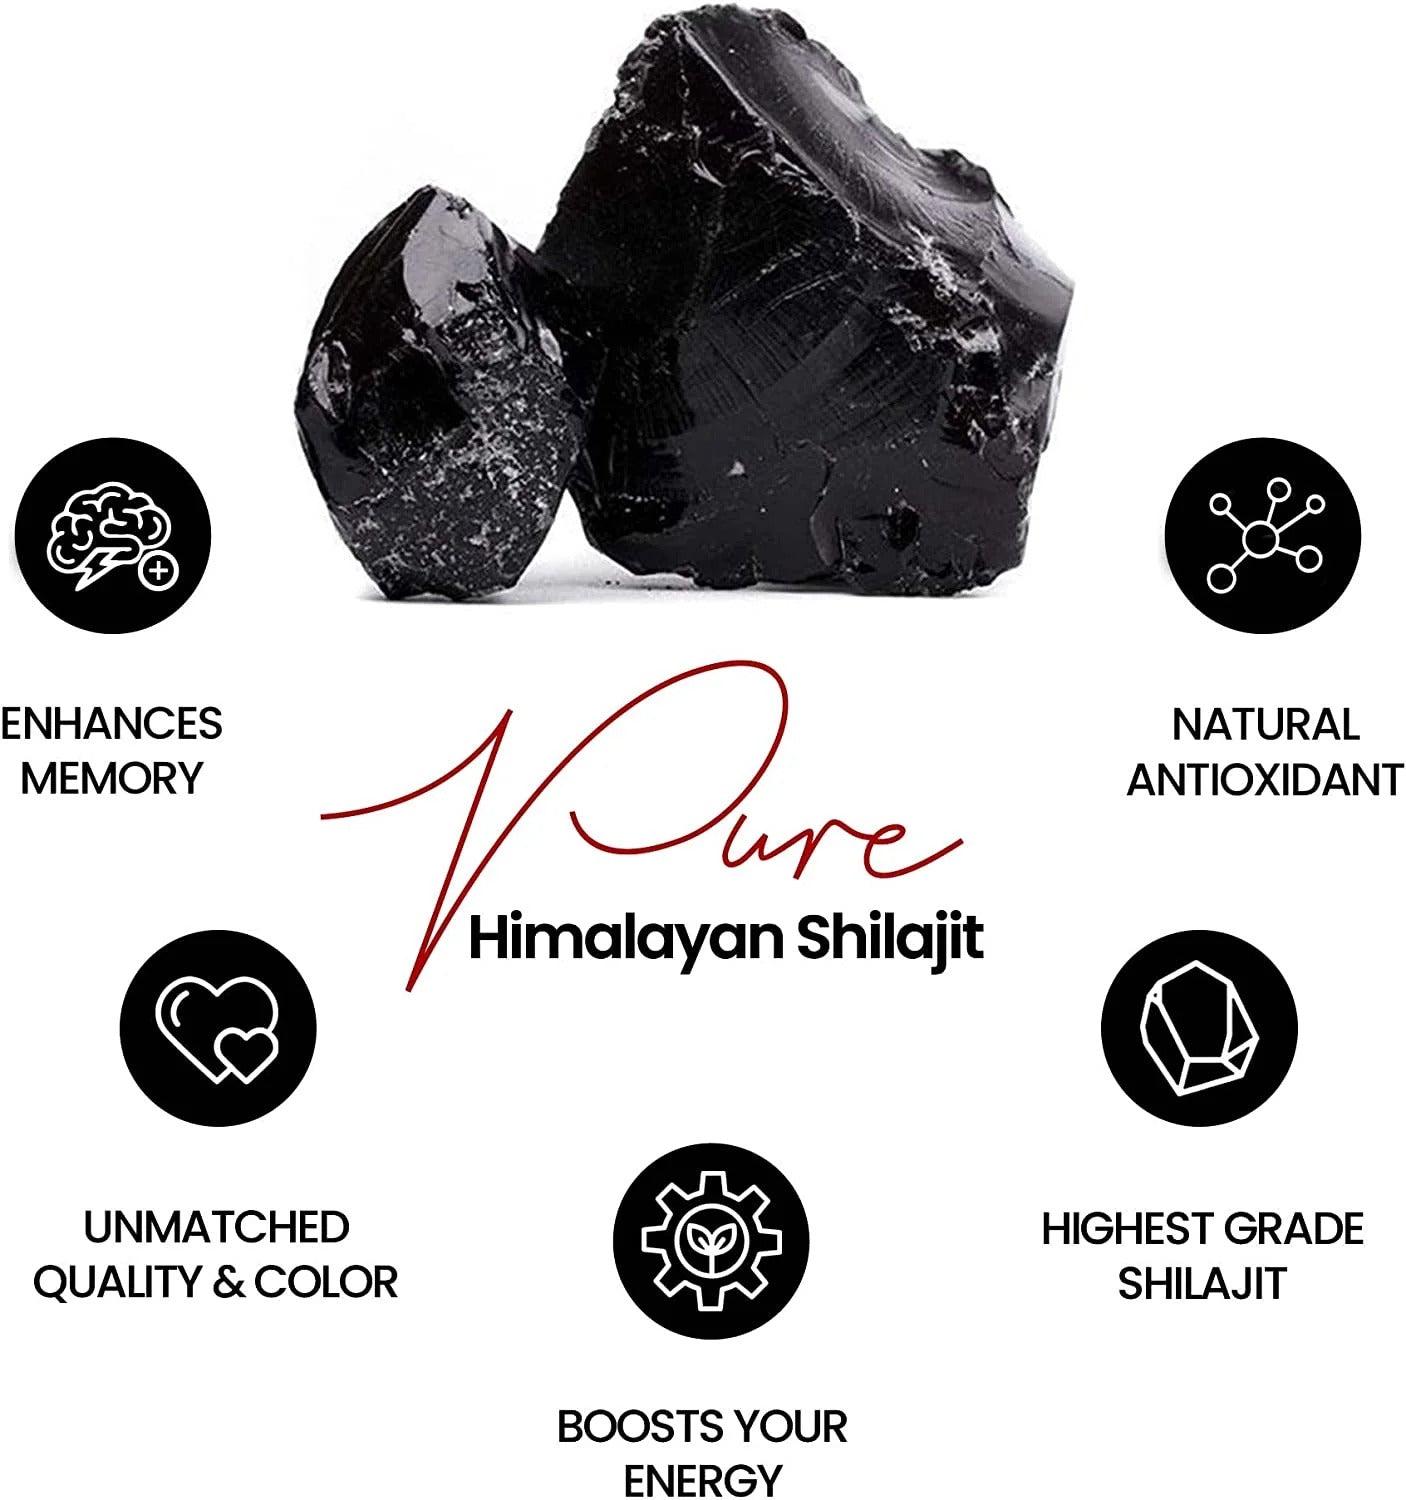 Why is Mountain Shilajit Considered a Superfood?